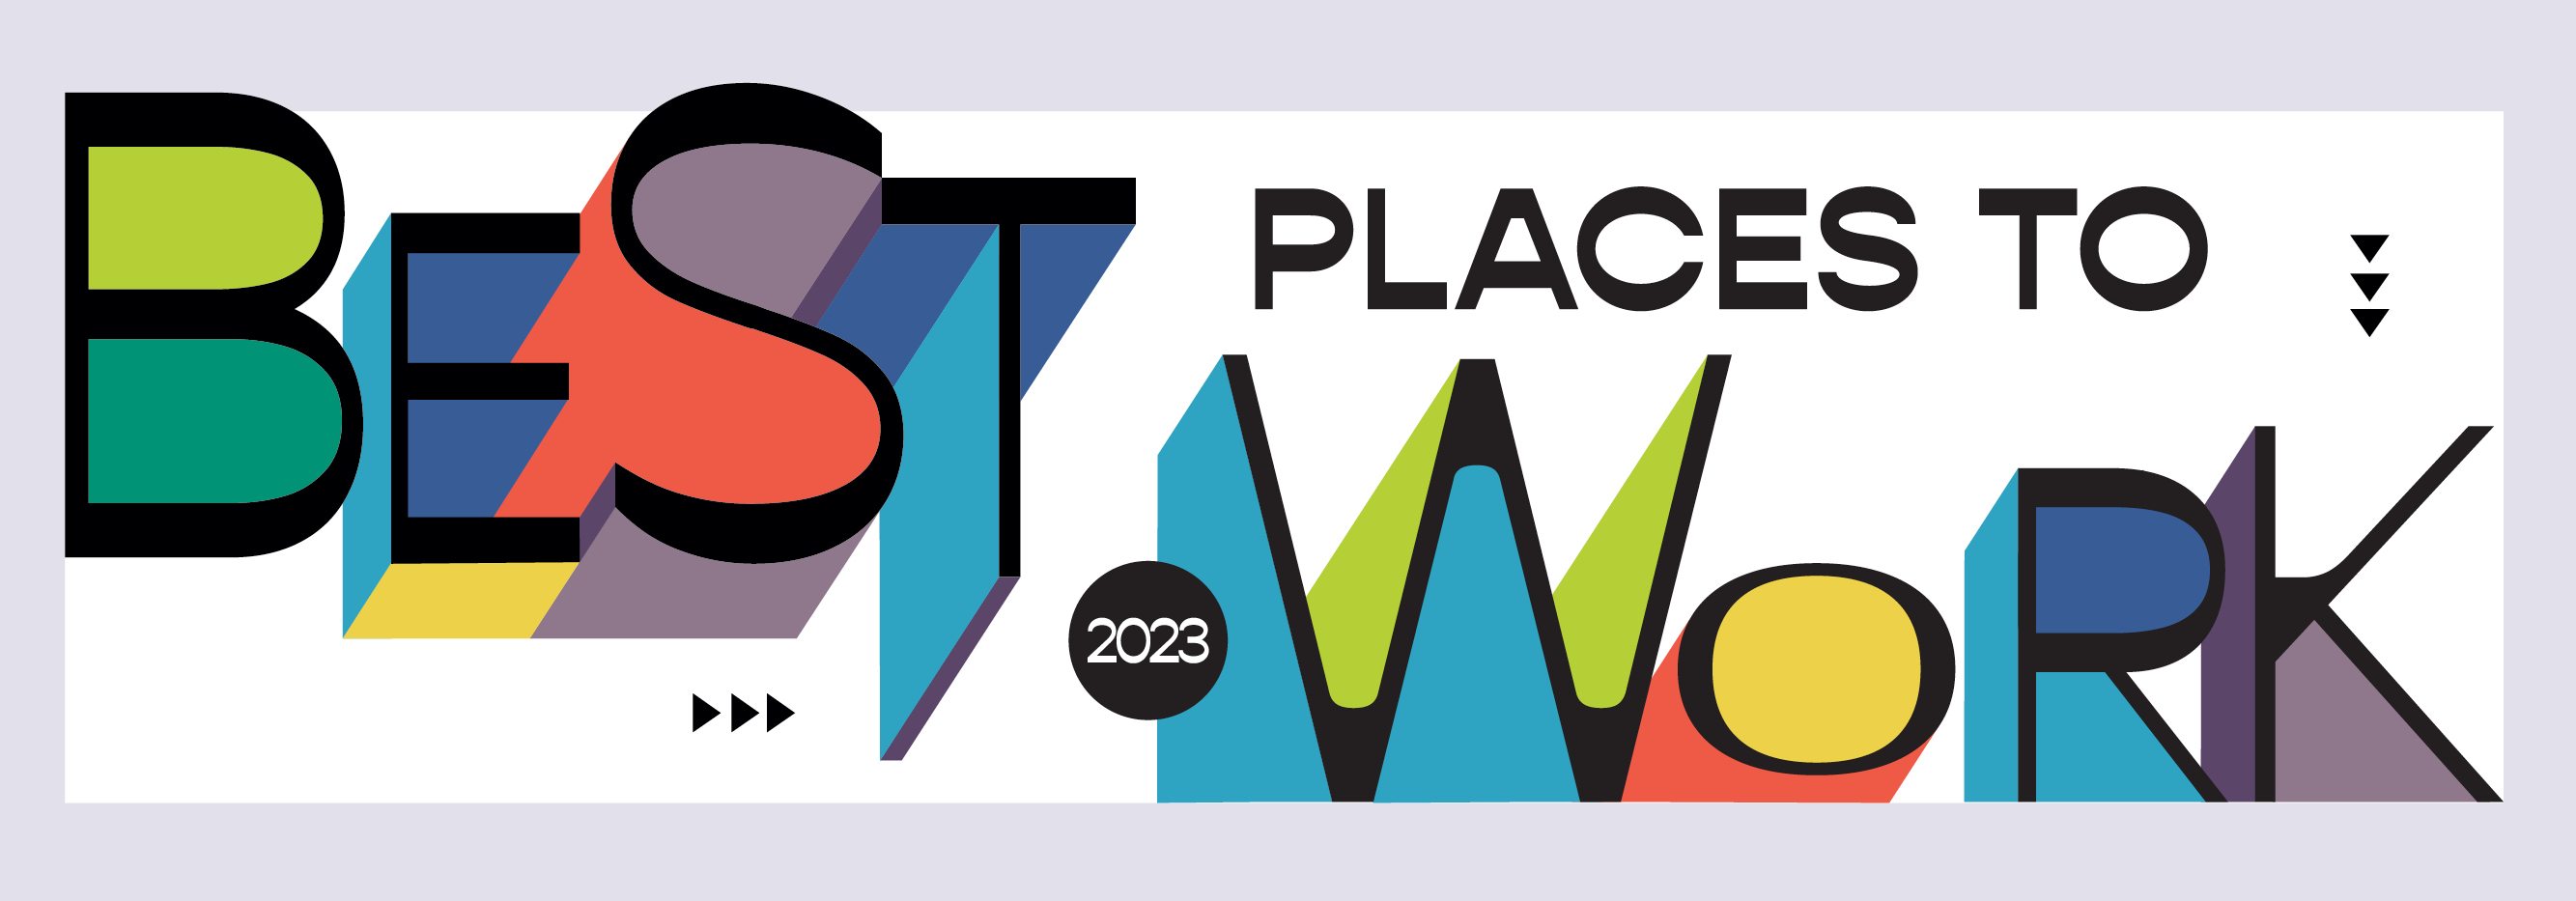 Best Places to Work 2023 banner image